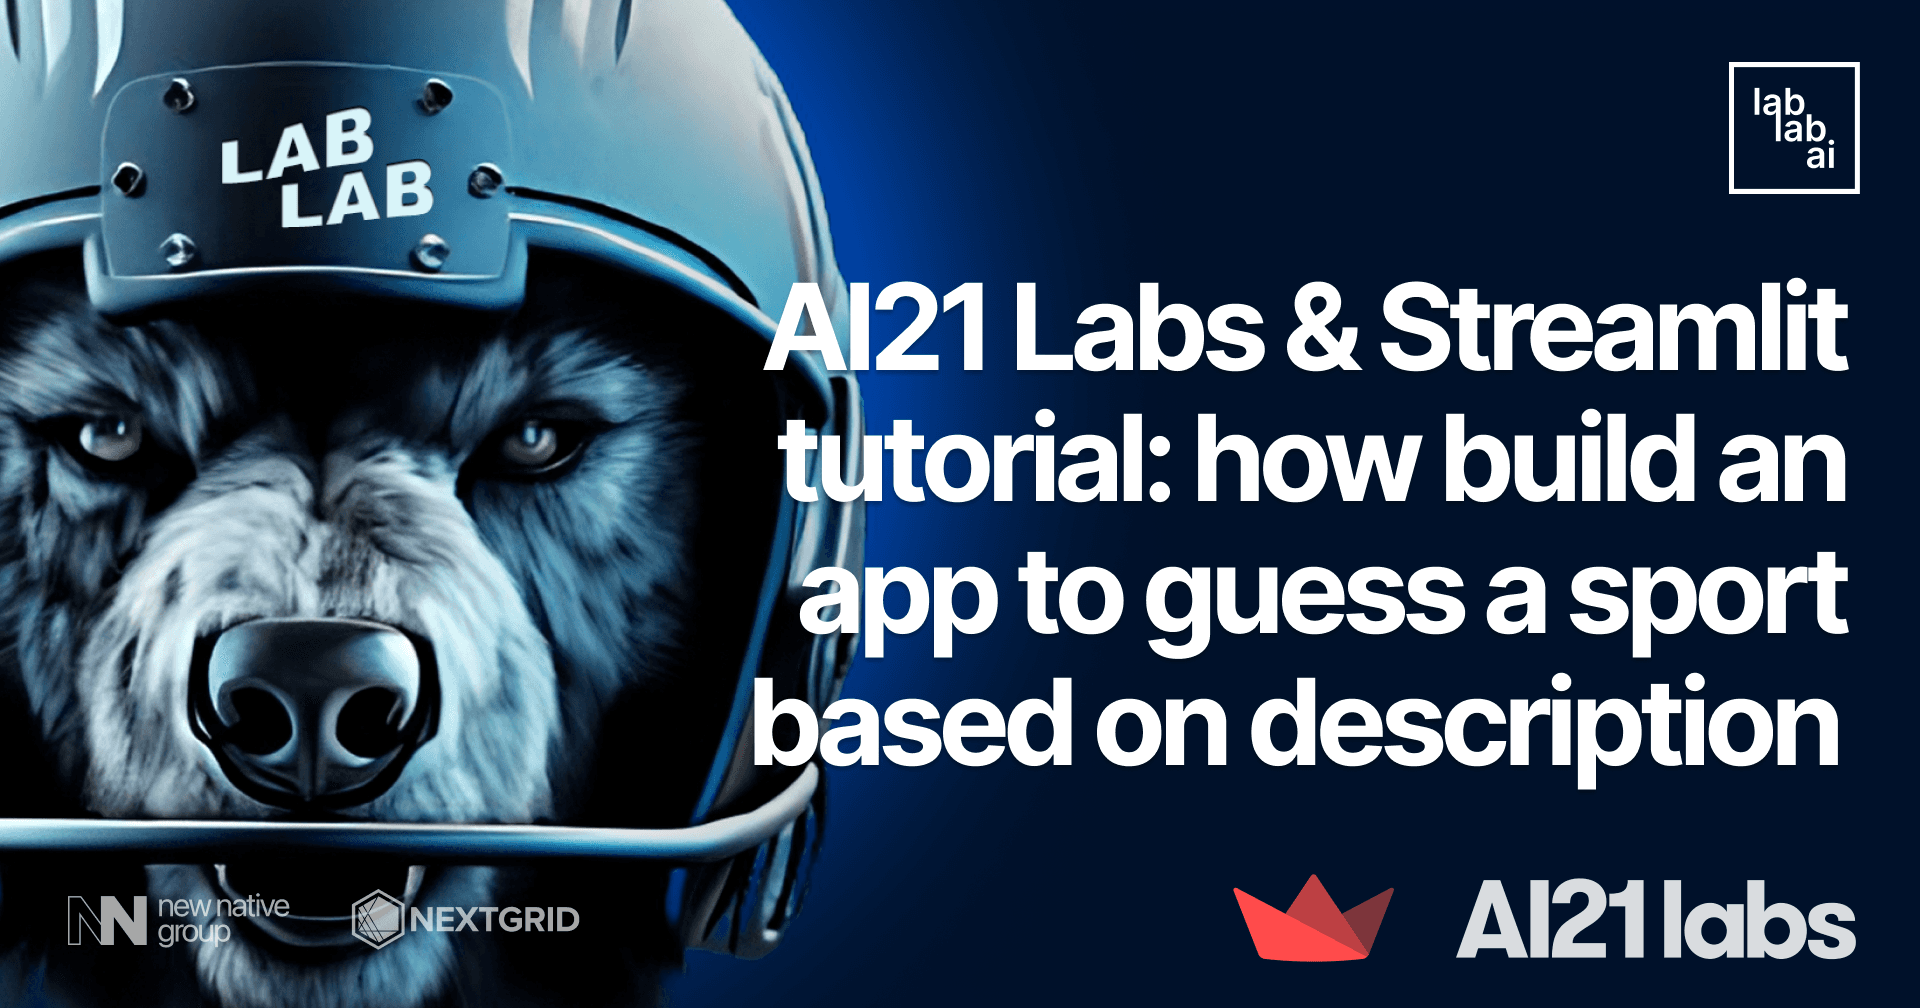 AI21 Labs & Streamlit tutorial: how build an app to guess a sport based on description